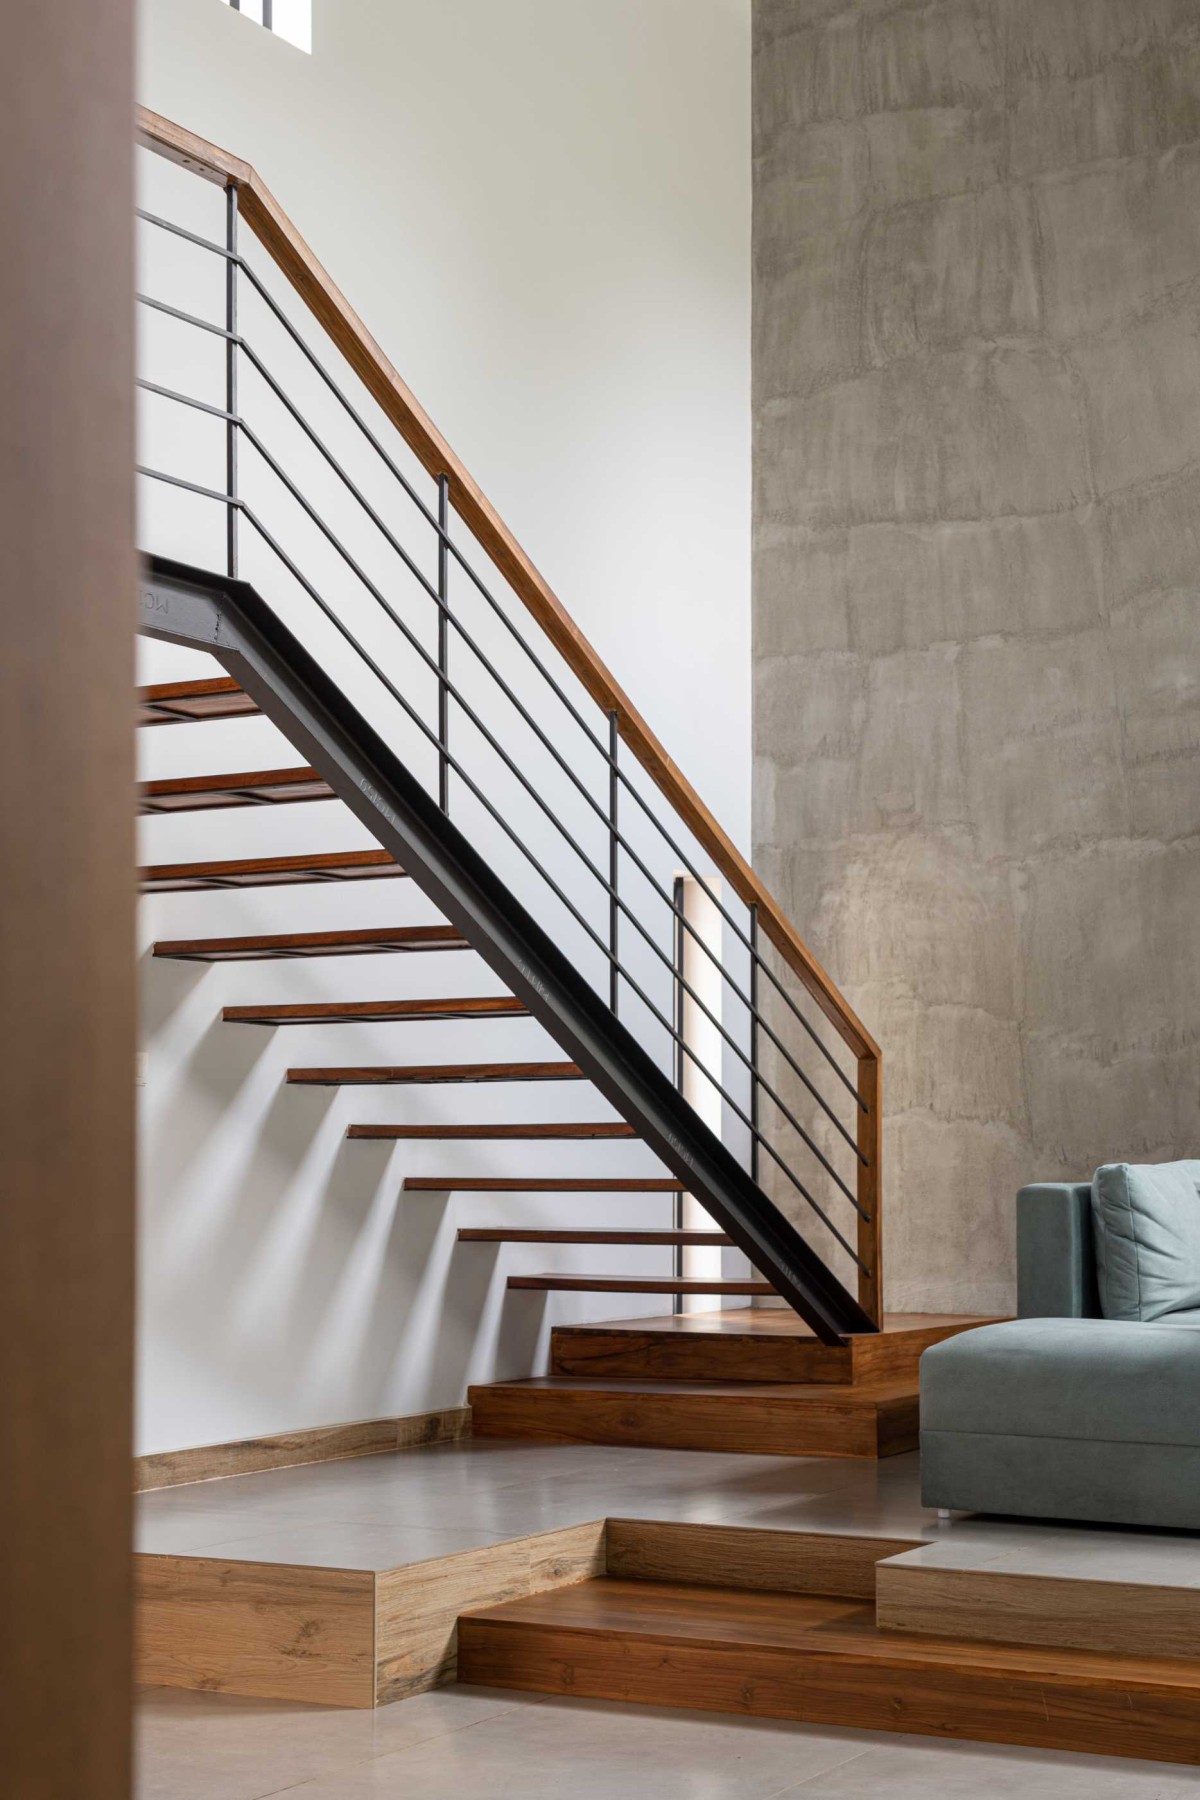 Staircase of Cent Home by FiF Studio